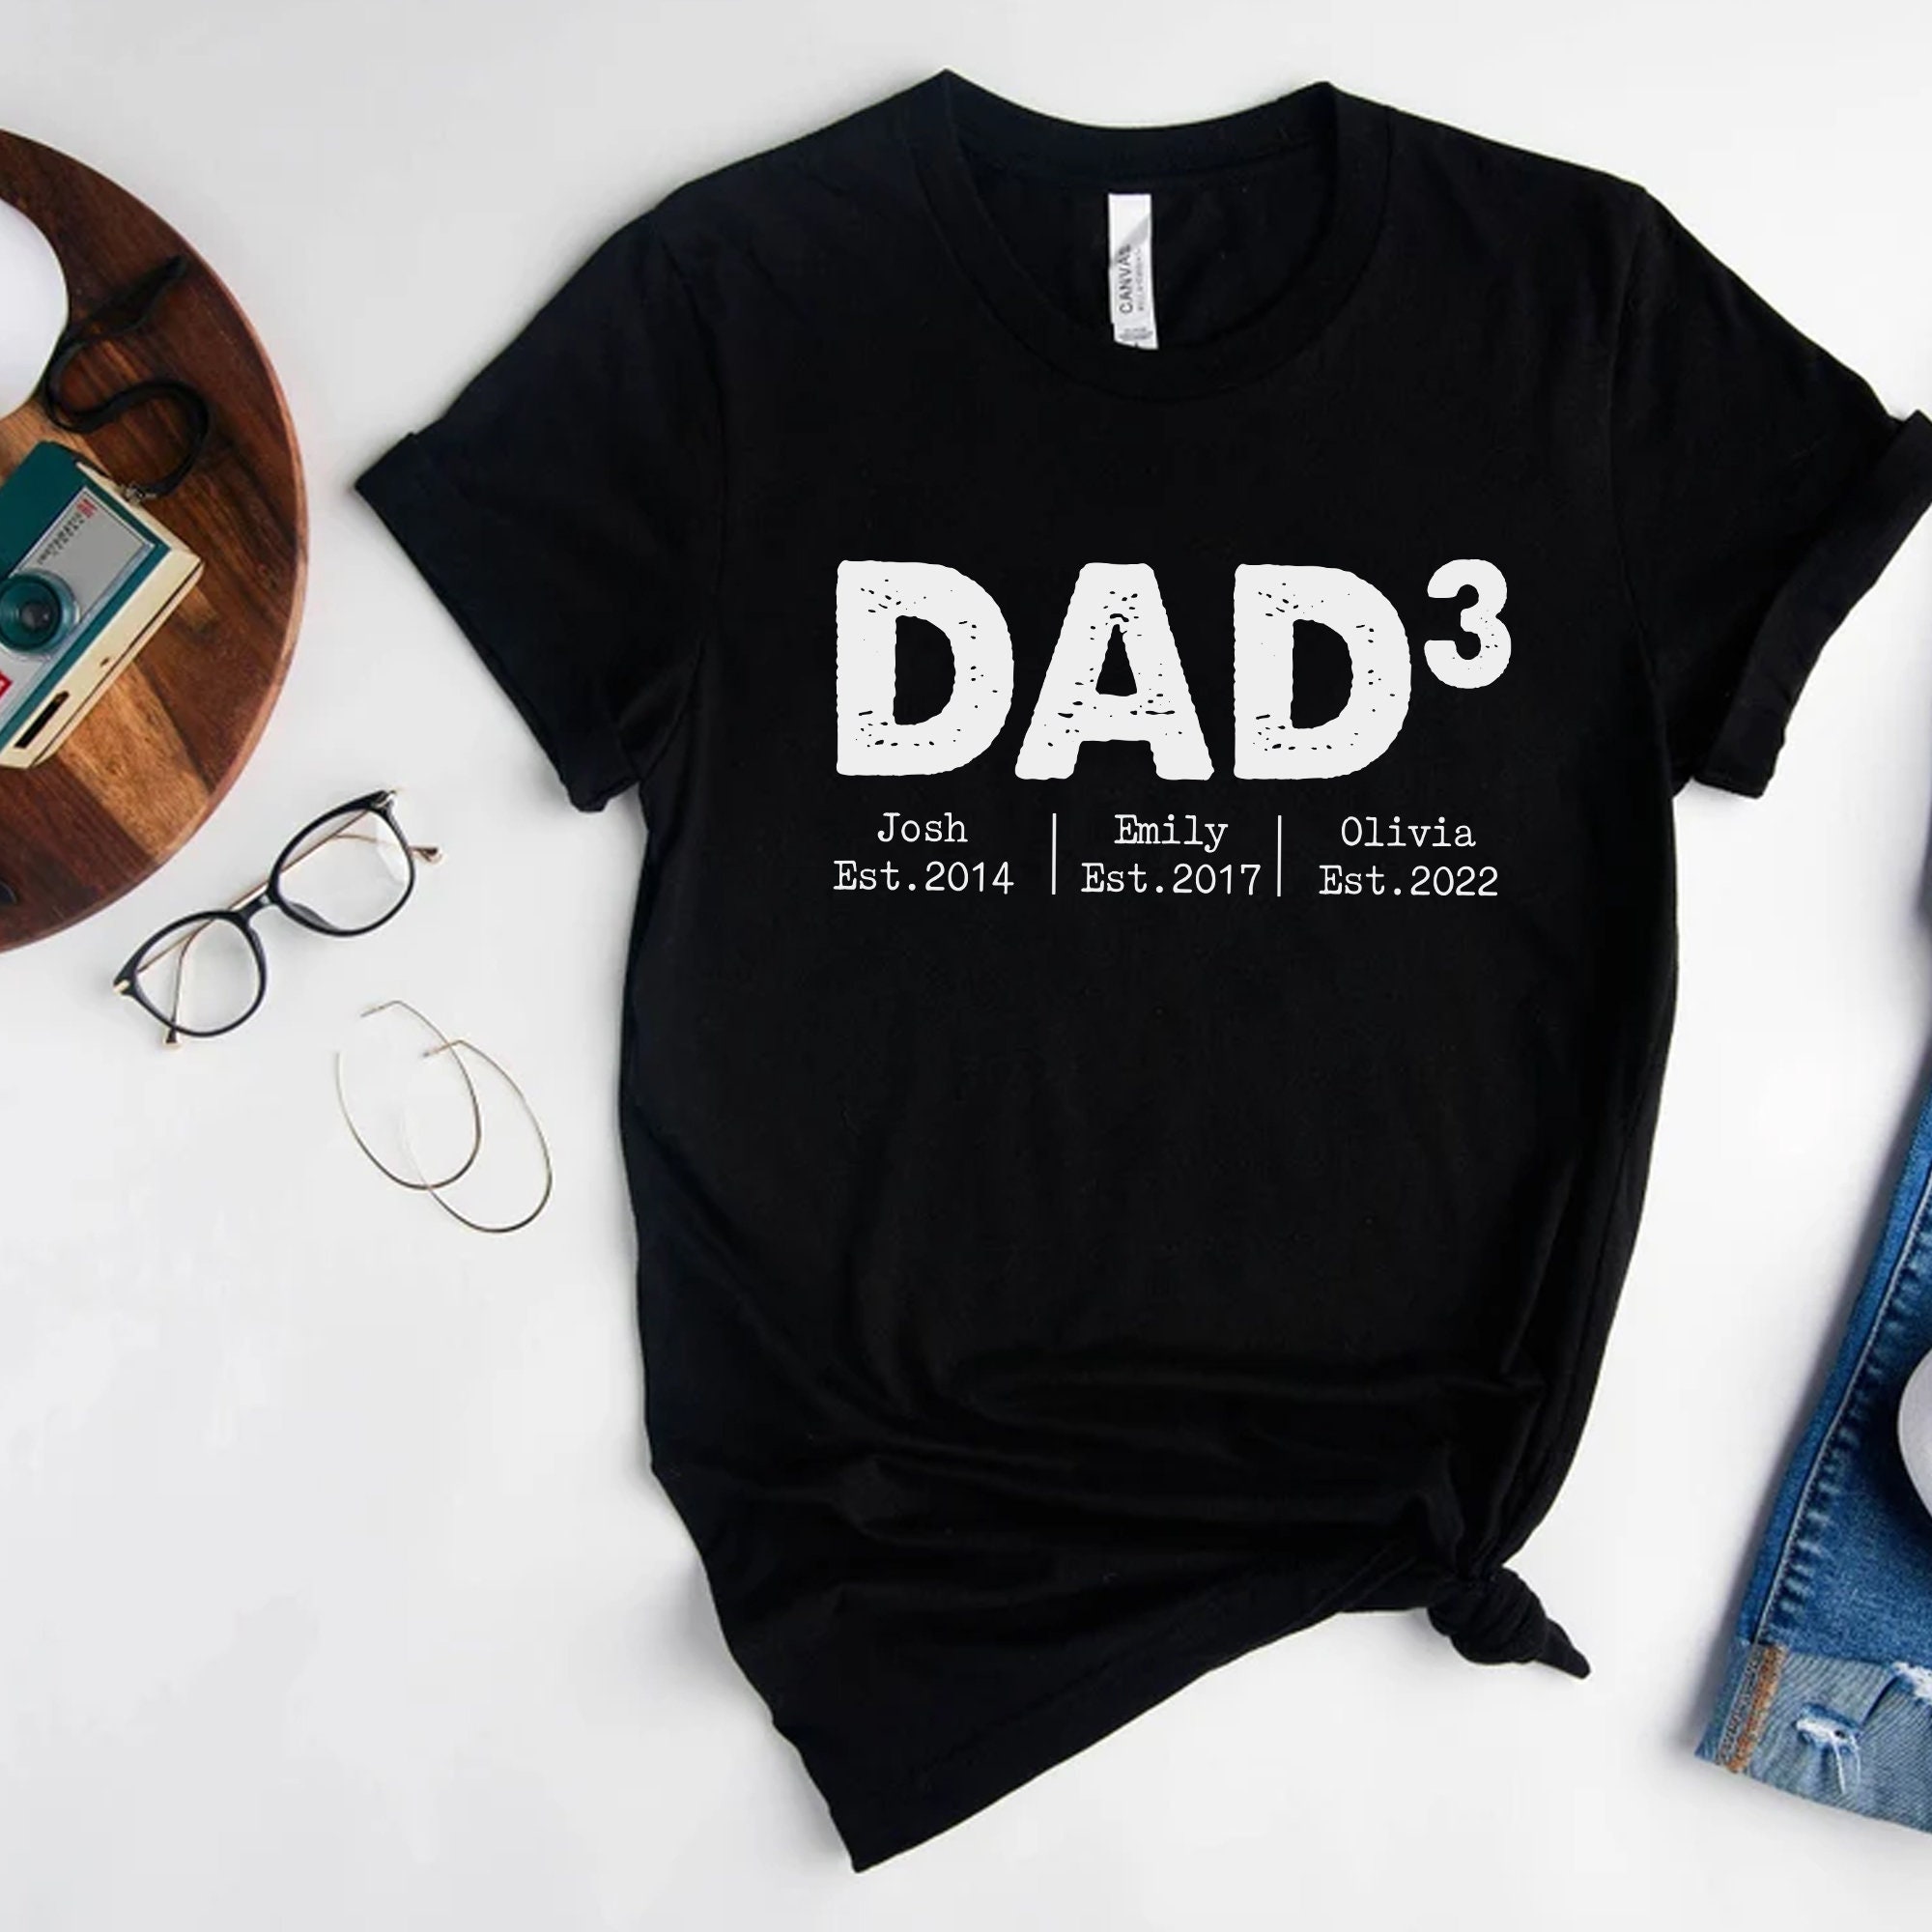 Bellezaalux Personalized Dad Shirt, Daddy Shirt with Kids Name, Father's Day Shirt, Gift for Dad, Dad and Daughter Shirt, Personalized Grandpa Shirt